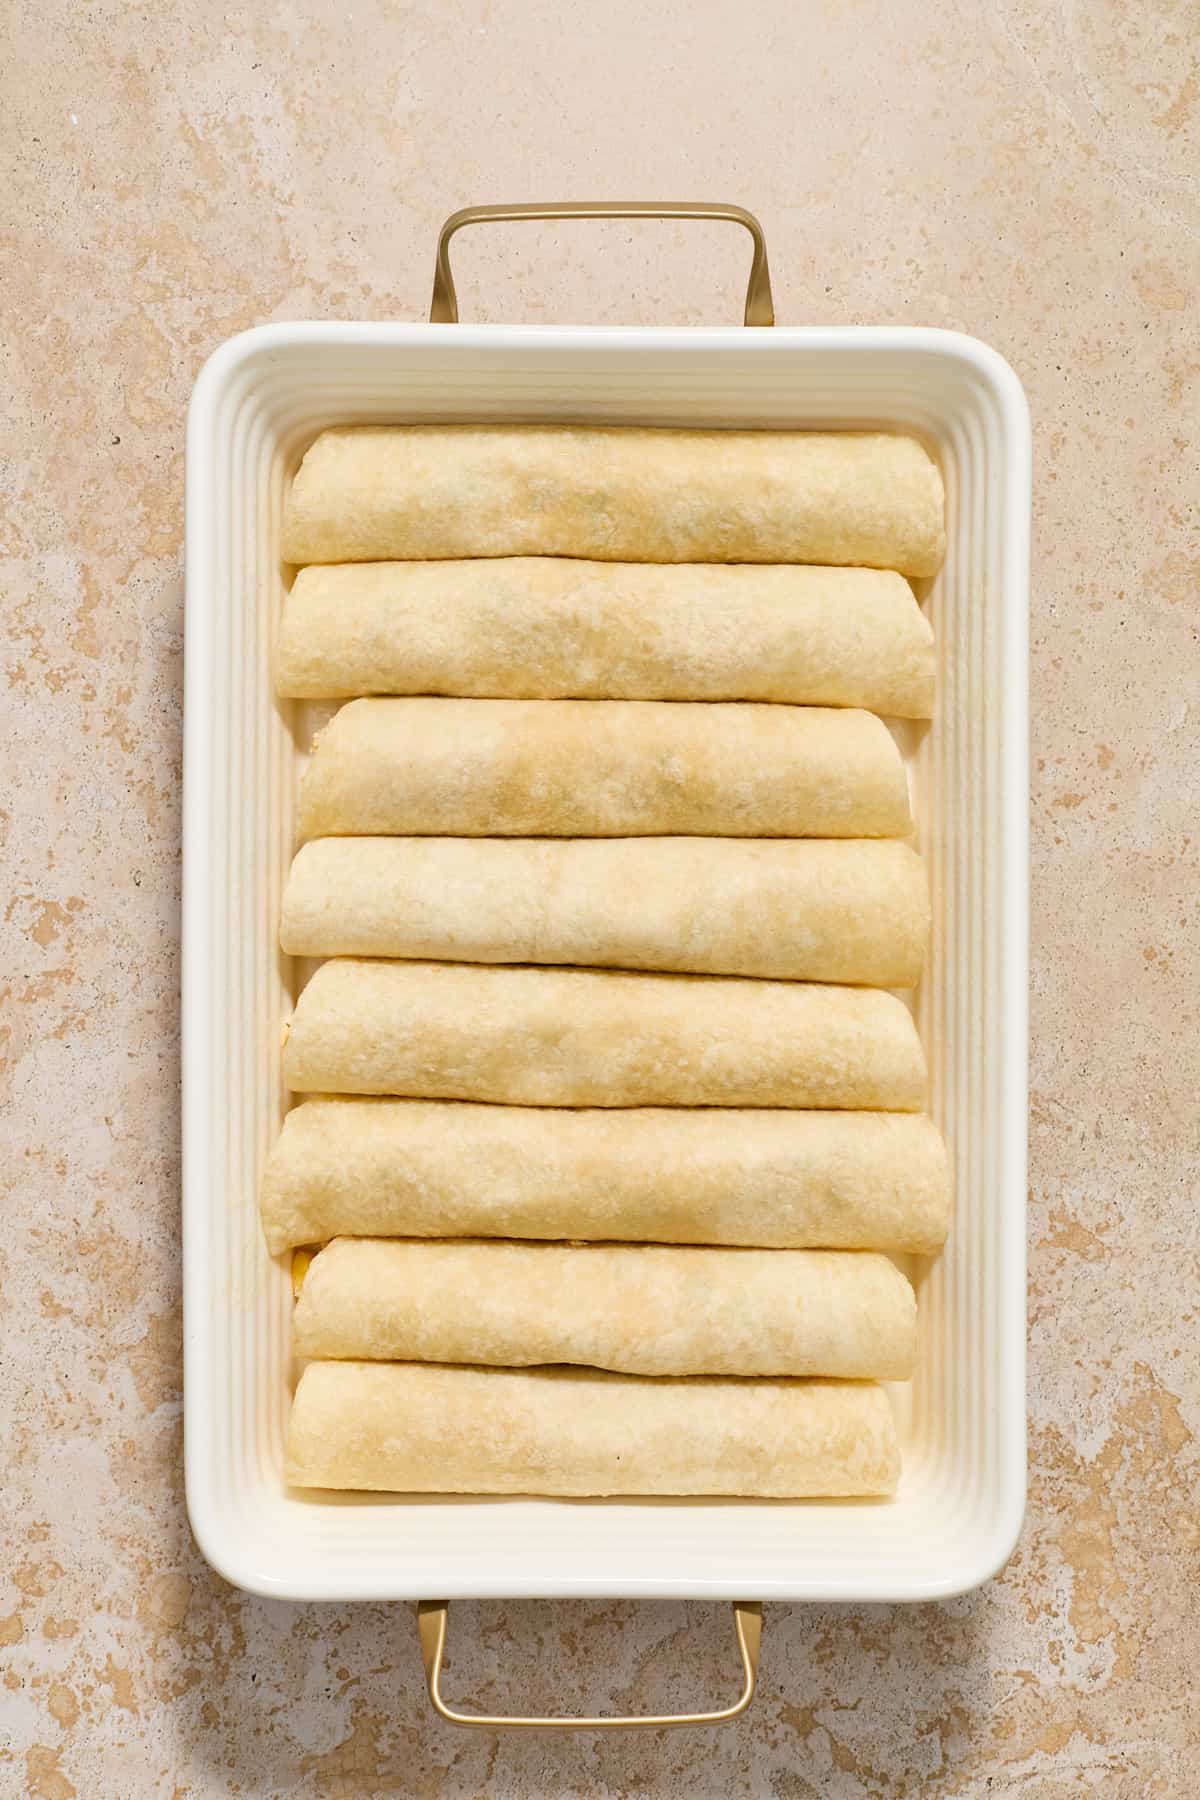 Rolled tortillas with green chicken enchilada mixture in pan.